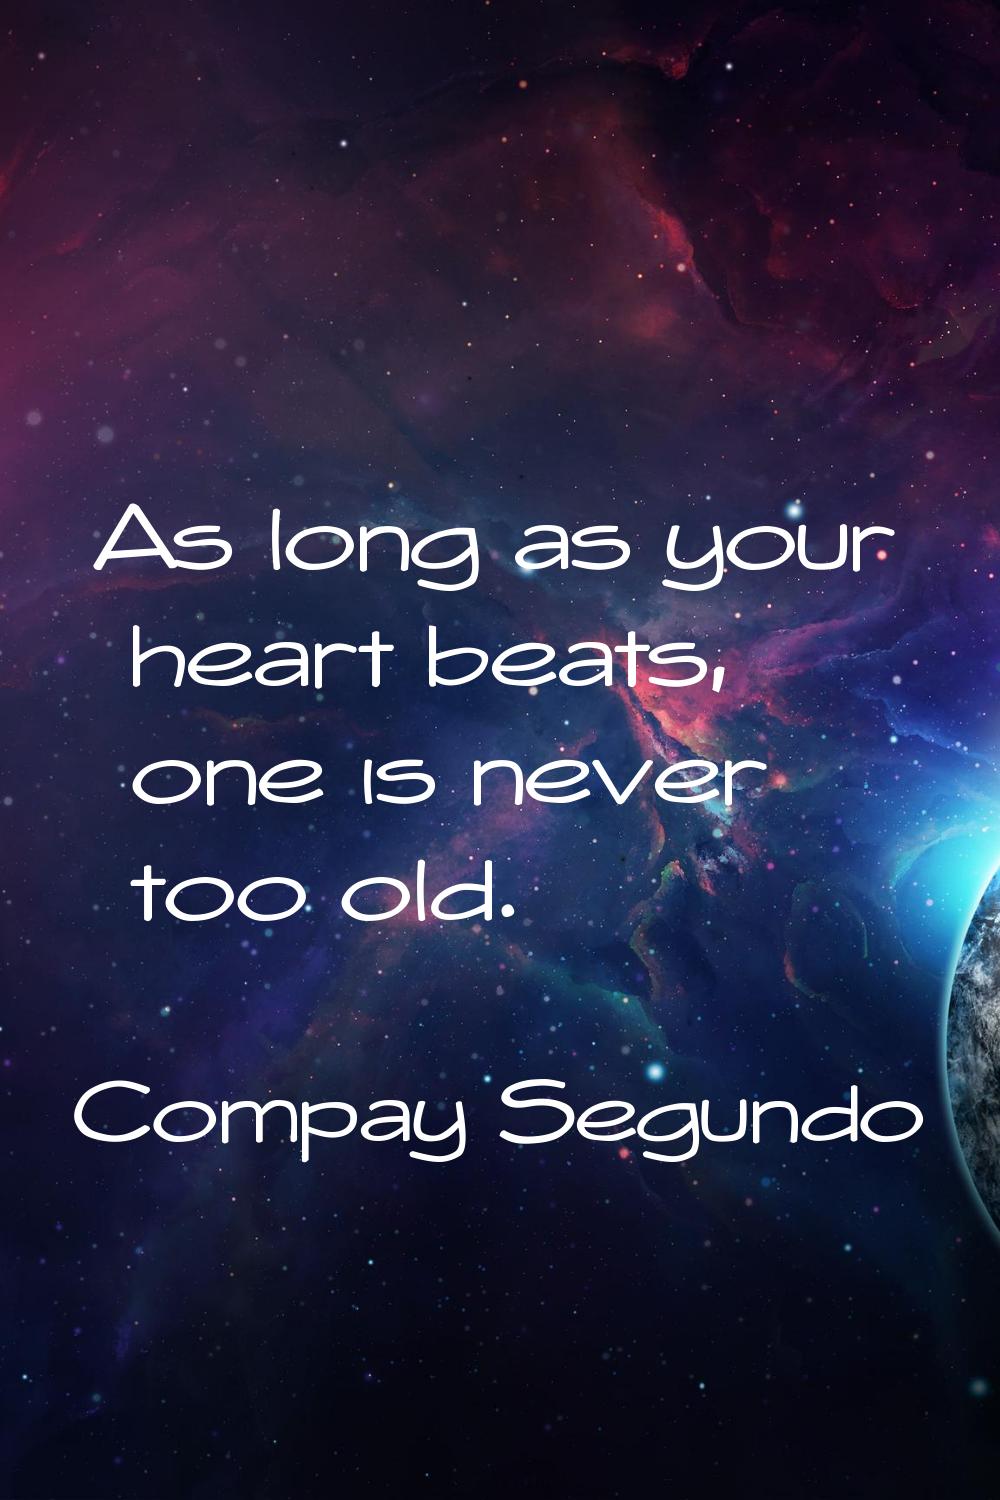 As long as your heart beats, one is never too old.